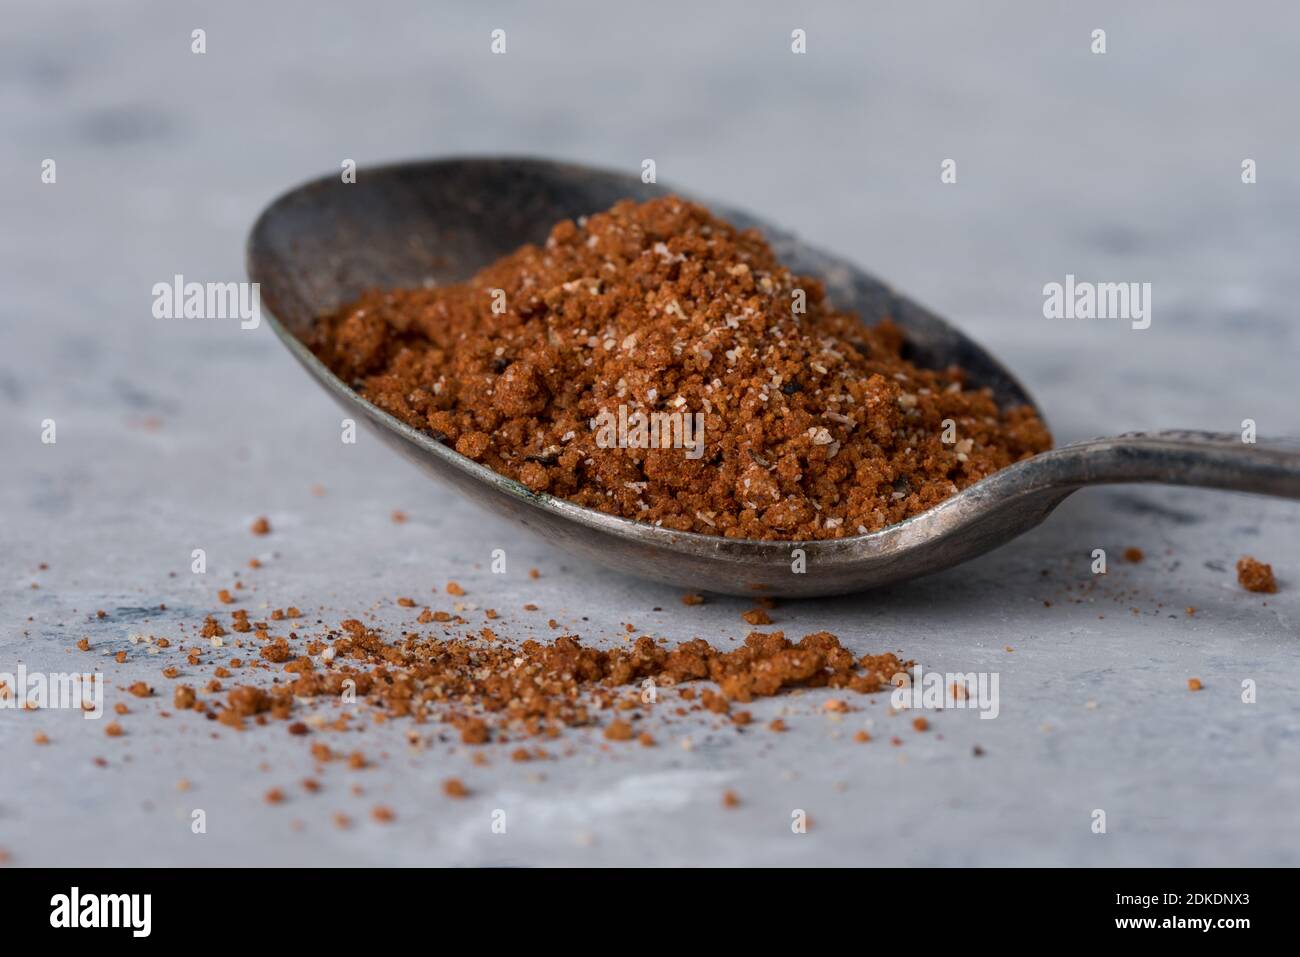 Close-up Of Spice In Spoon On Table Stock Photo